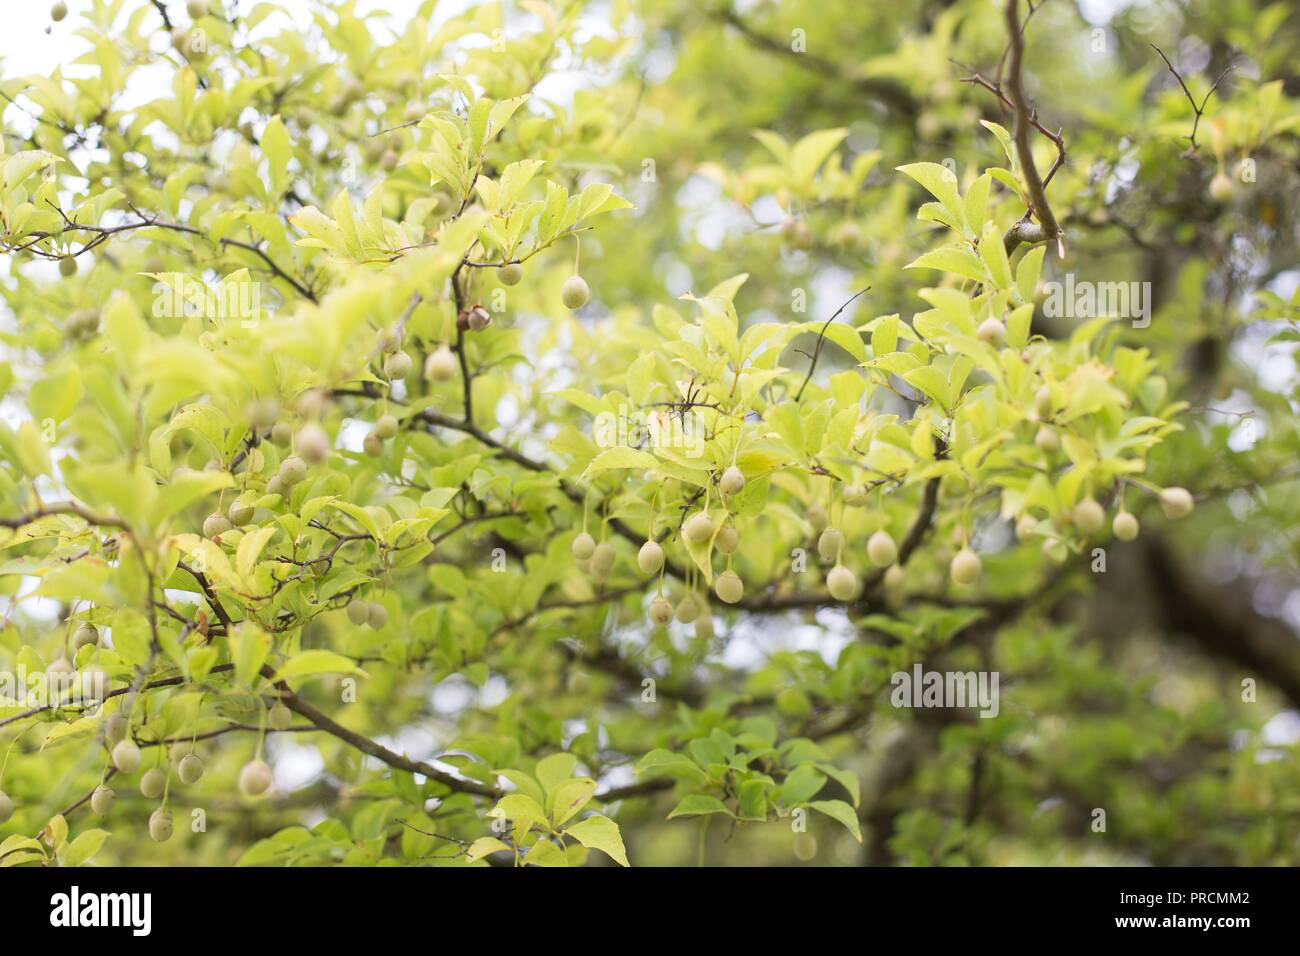 Close up of a Styrax Japonicus tree, also known as Japanese Snowbell, at Alton Baker park in Eugene, Oregon, USA. Stock Photo